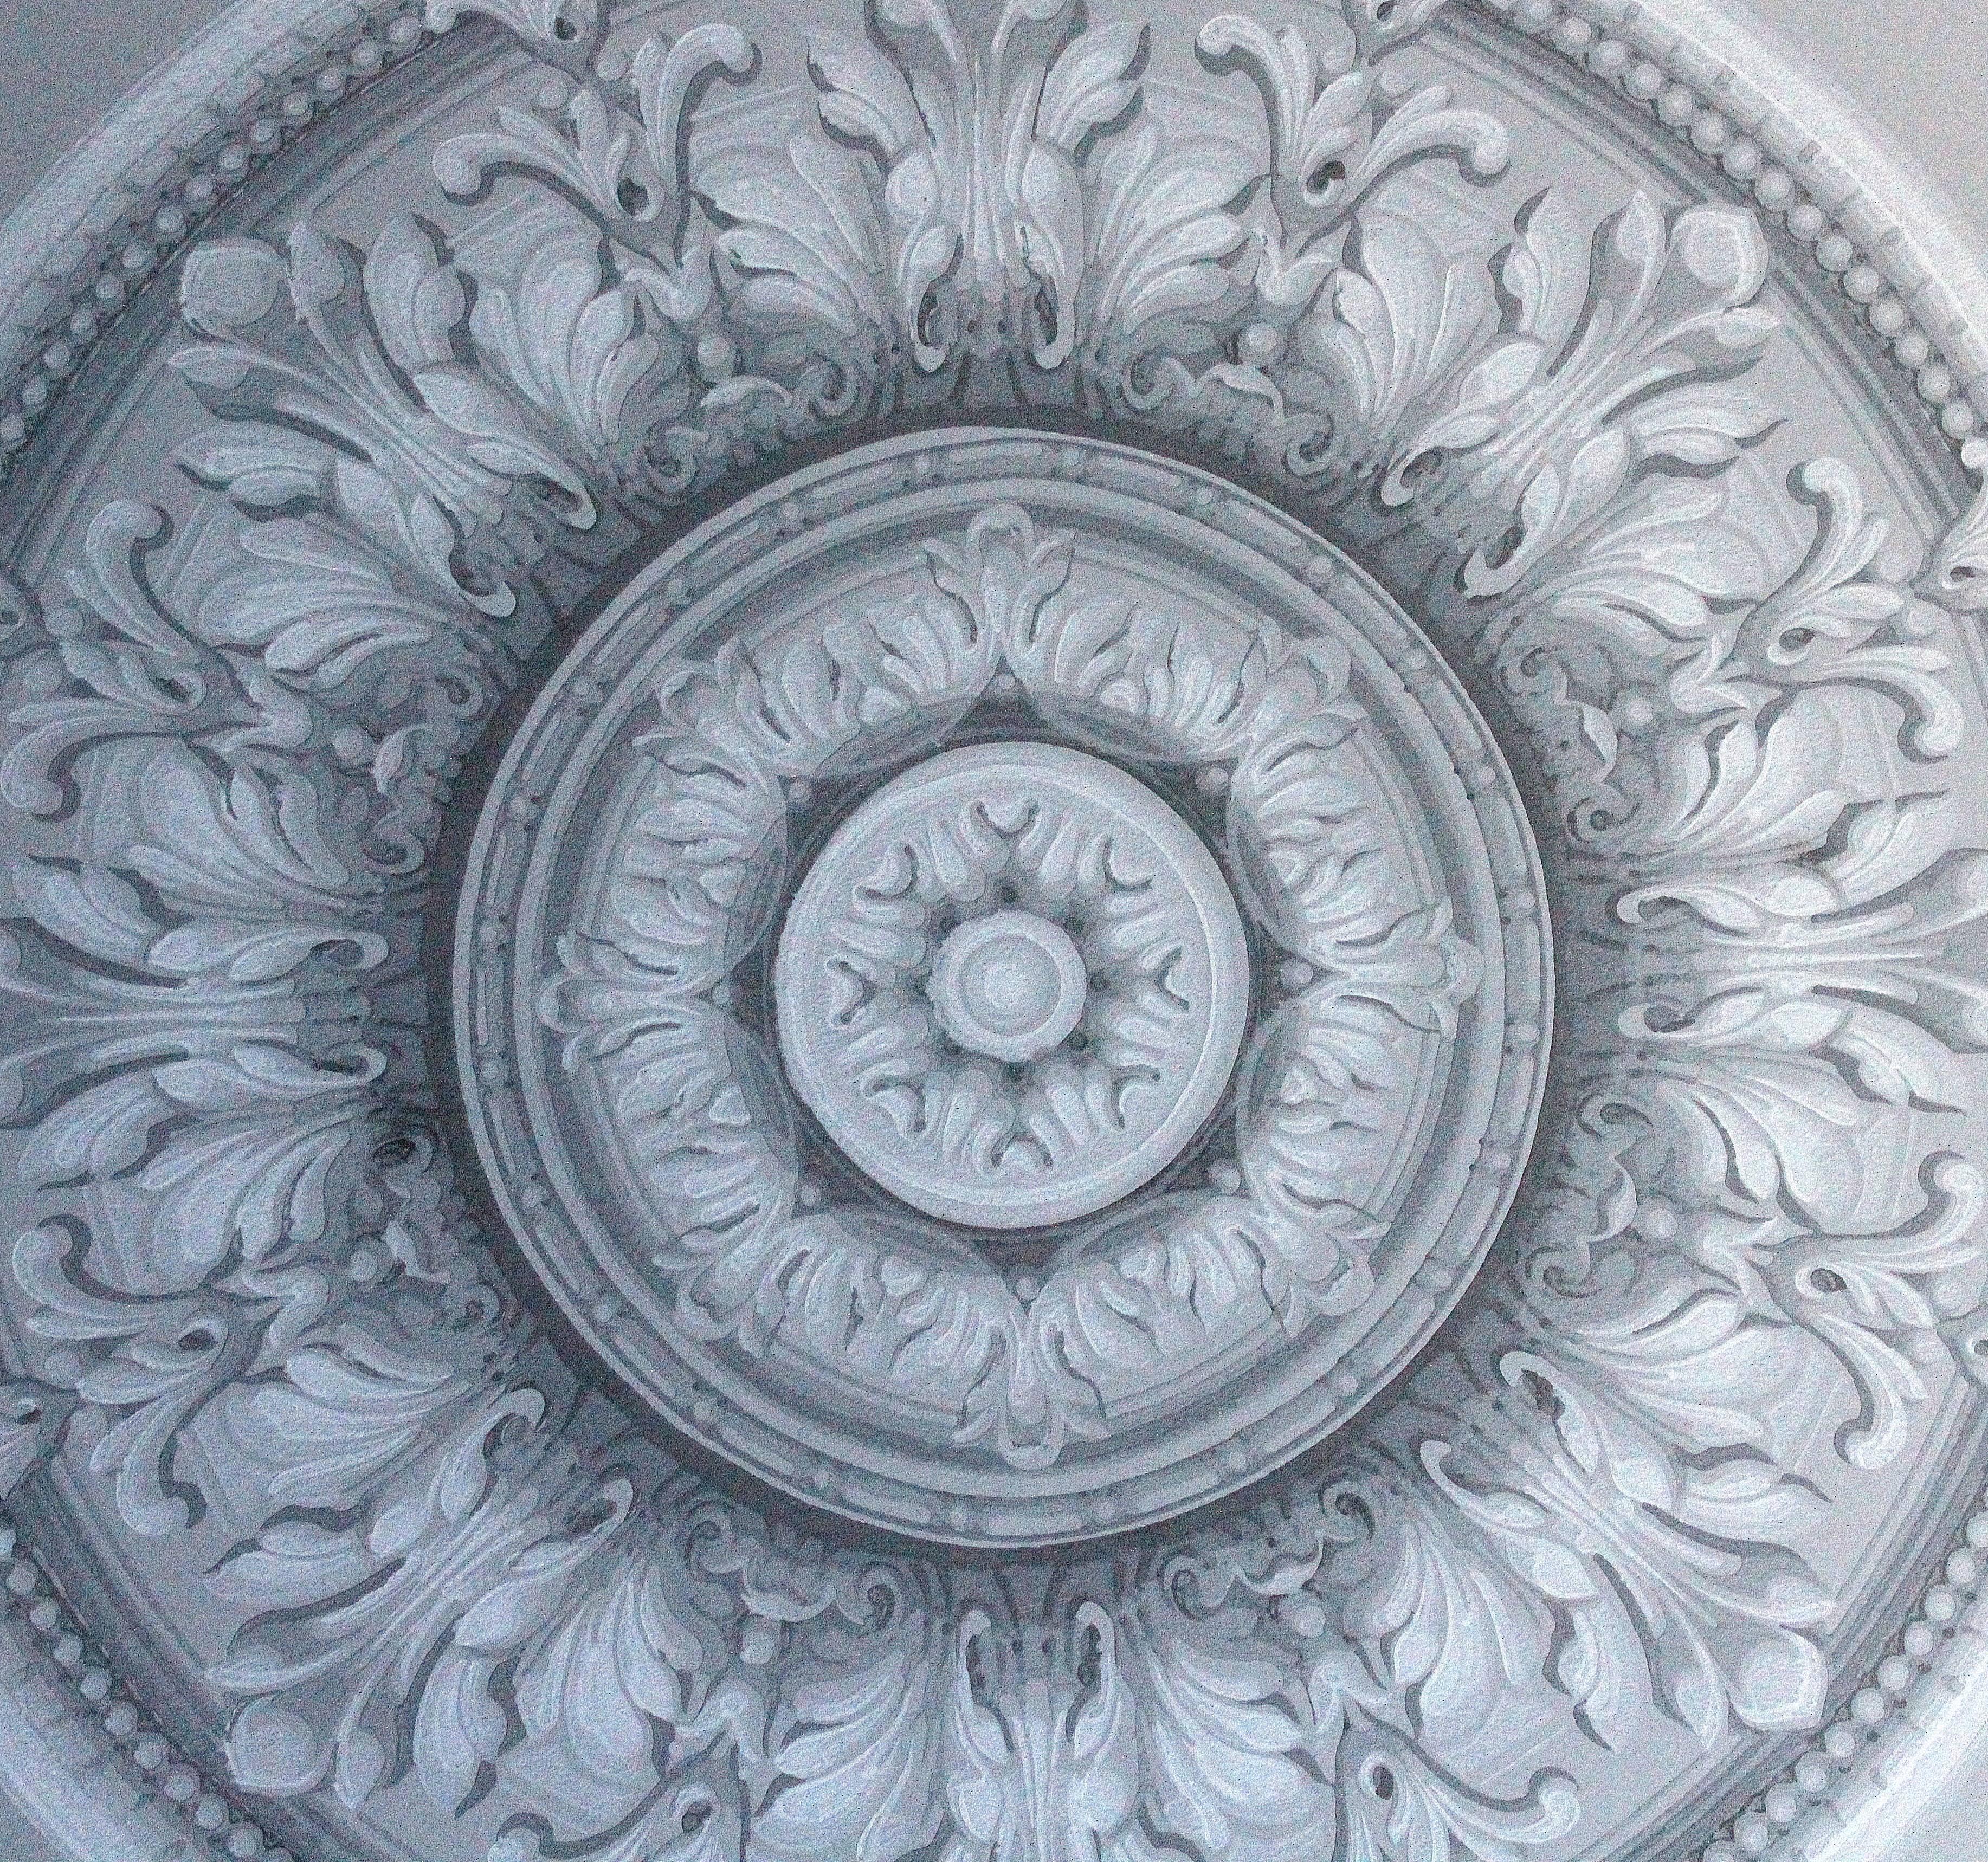 Irish 19th century grey ceiling piece with coordinating Irish molding from the archives of the David Skinner wallpaper collection. The center piece is framed with an original Irish hand-cast plaster molding decoration that was paired with this